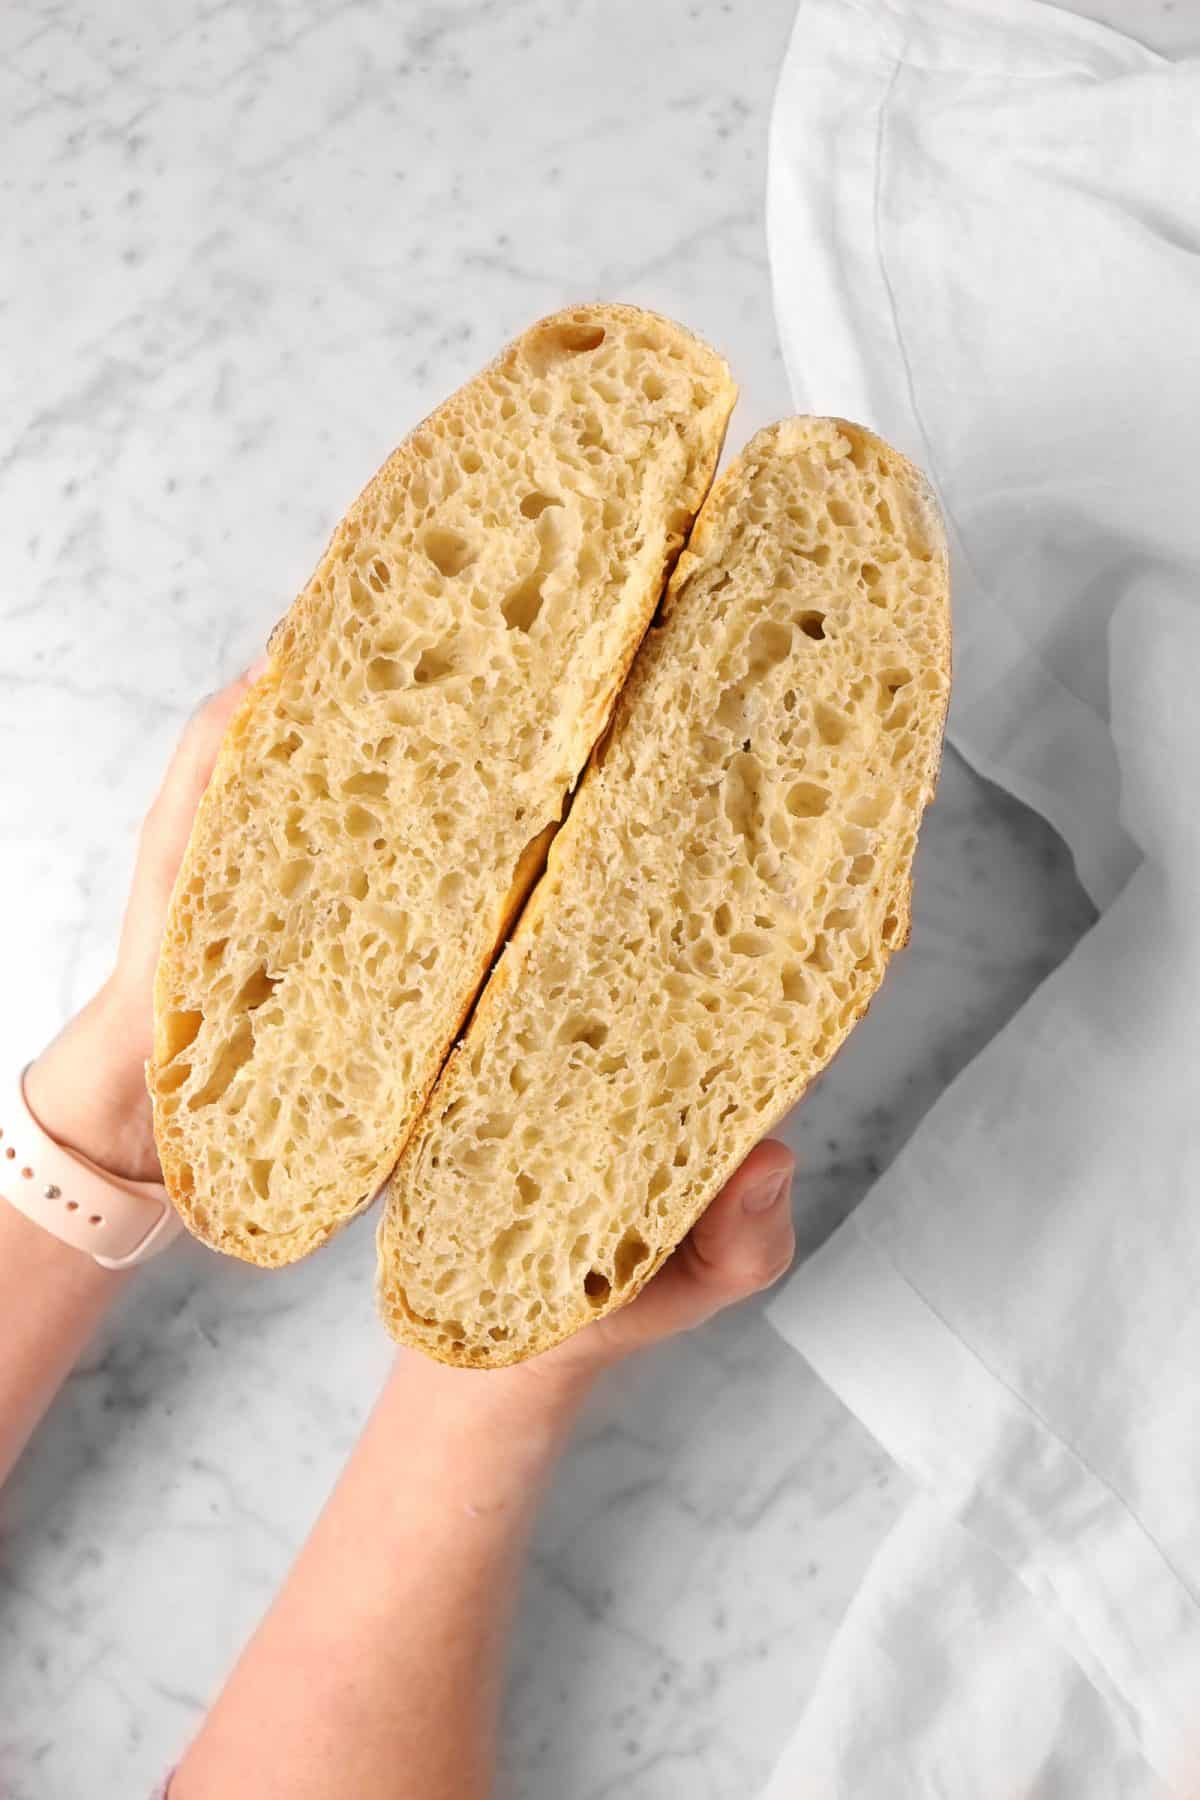 sourdough bread sliced in half being held up right on a marble counter with a white napkin